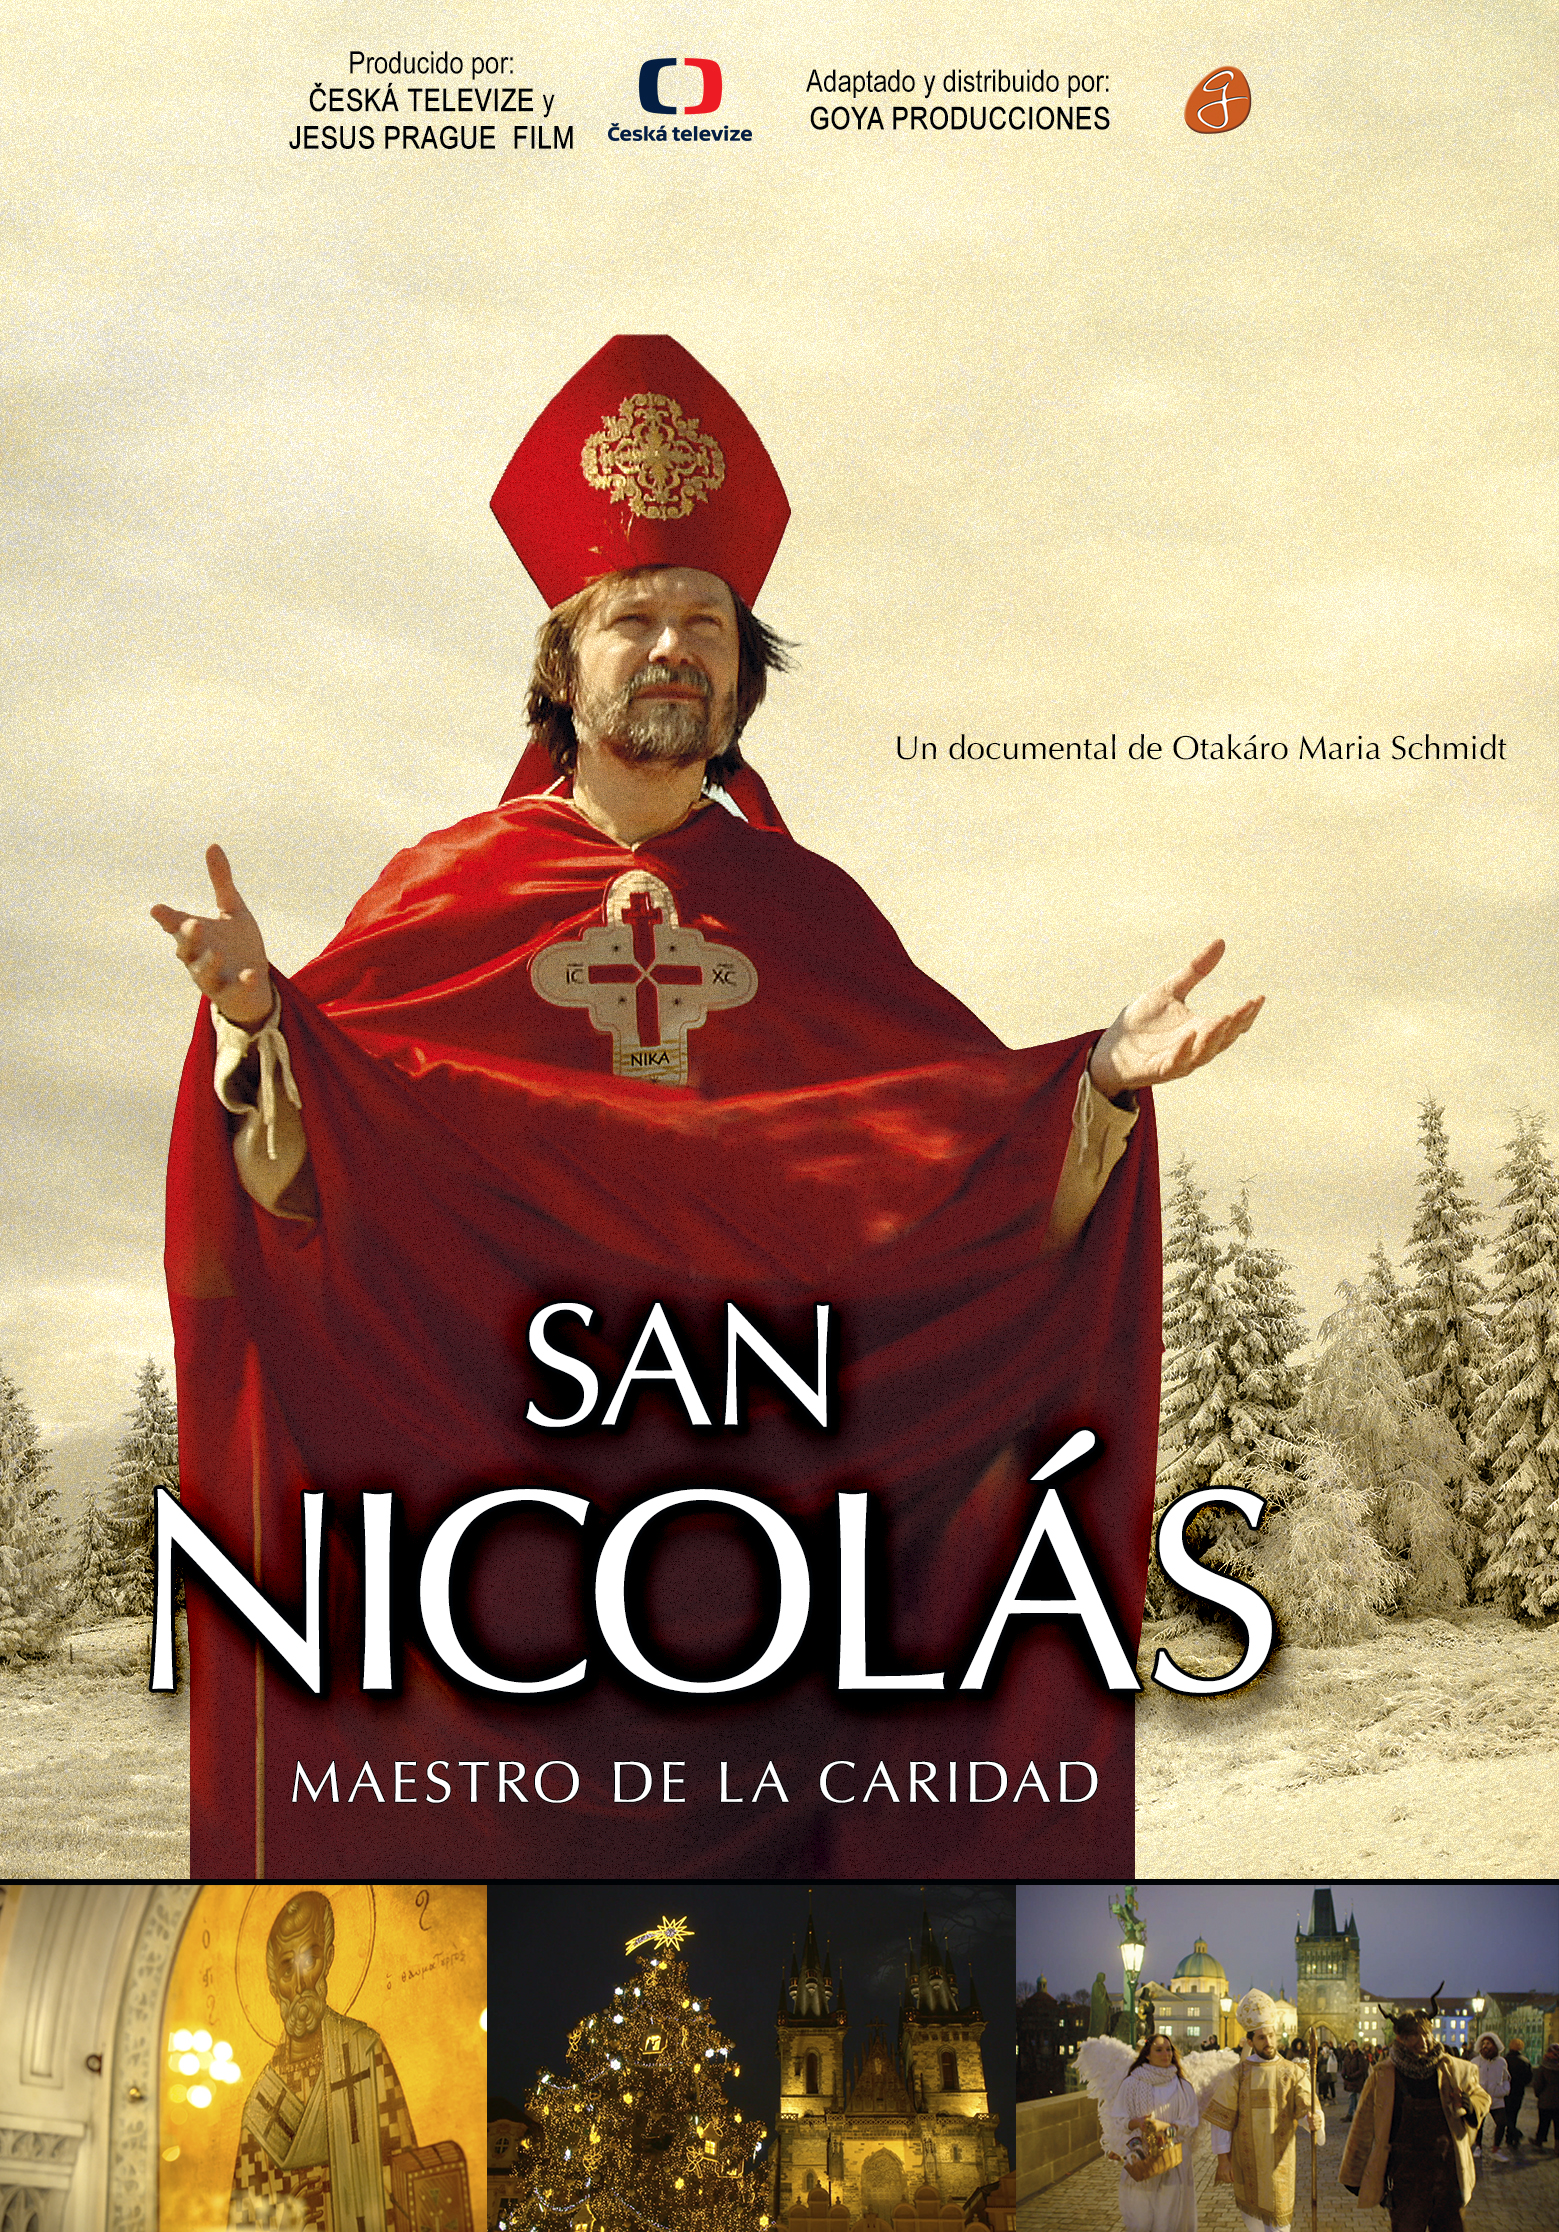 Nicholas: The Holy Master of Giving